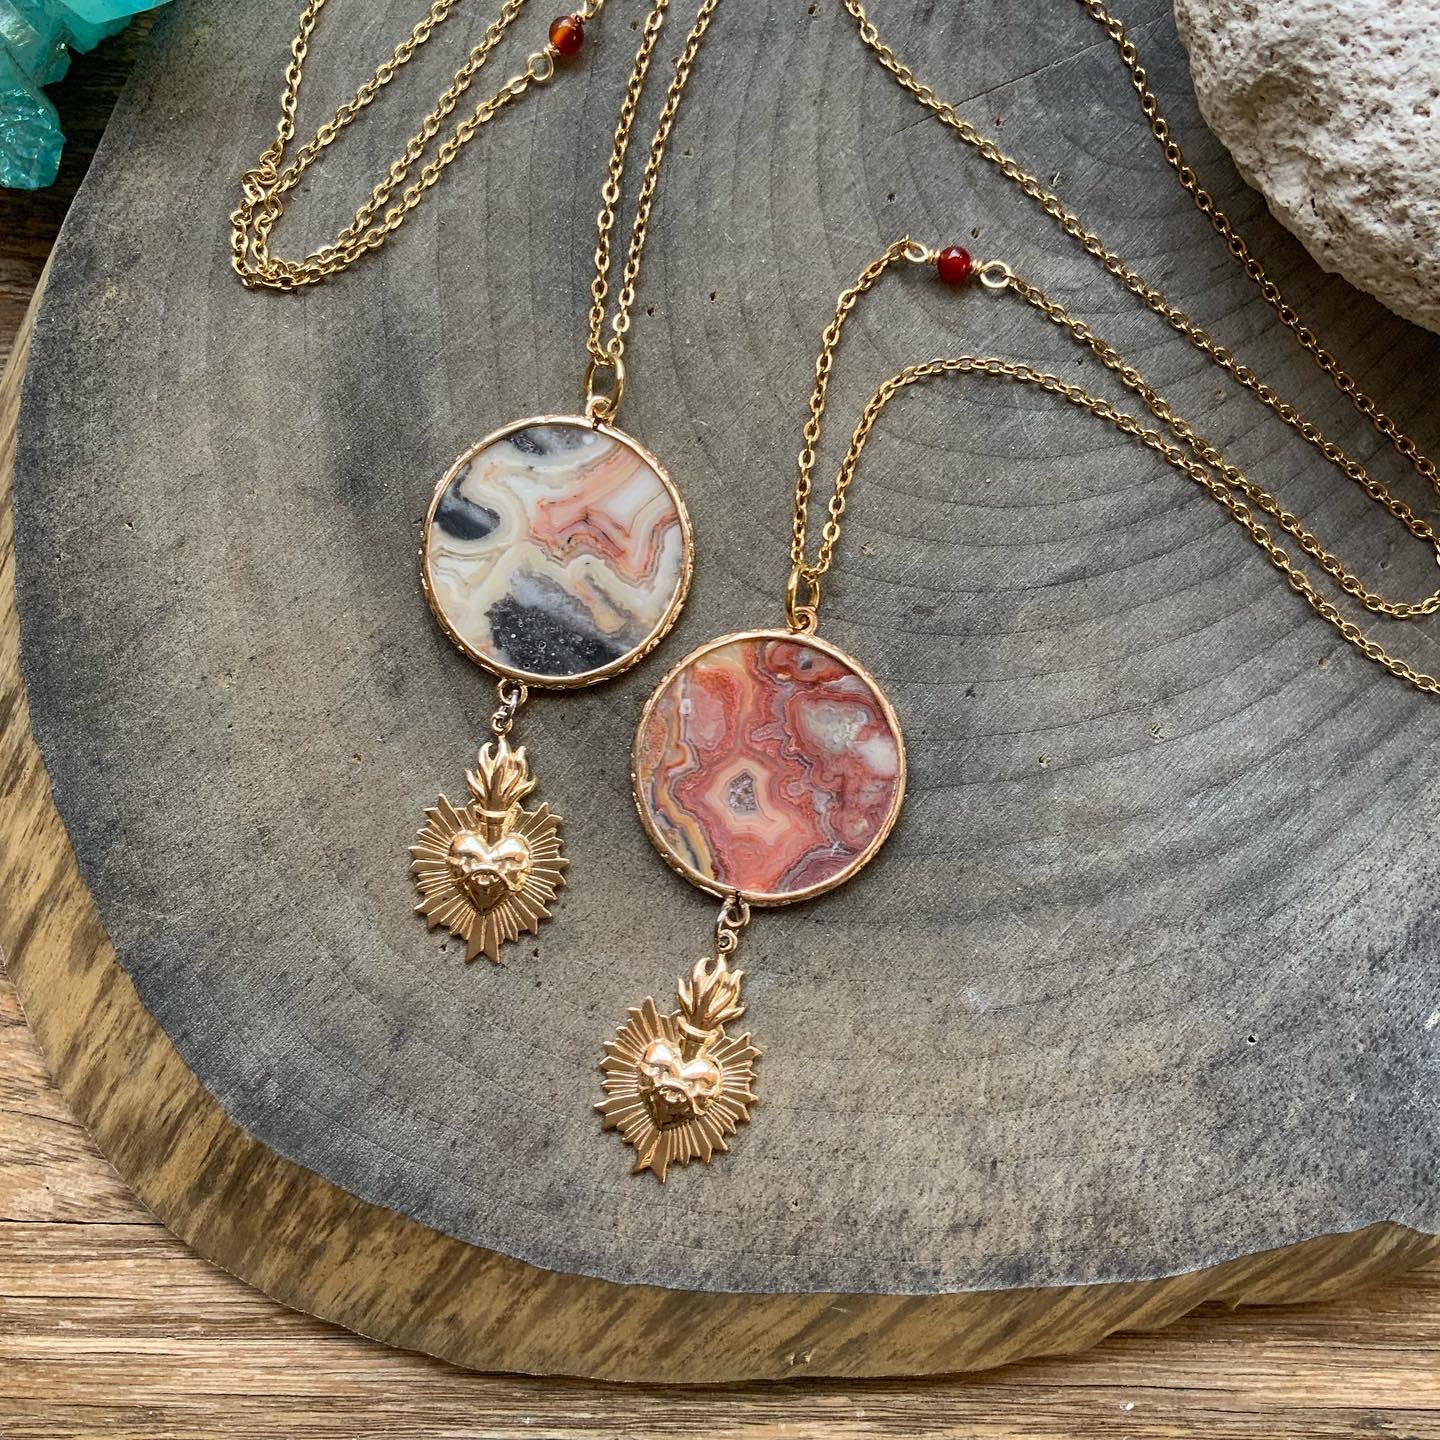 Flaming Sacred Heart charm and Agate disk necklace